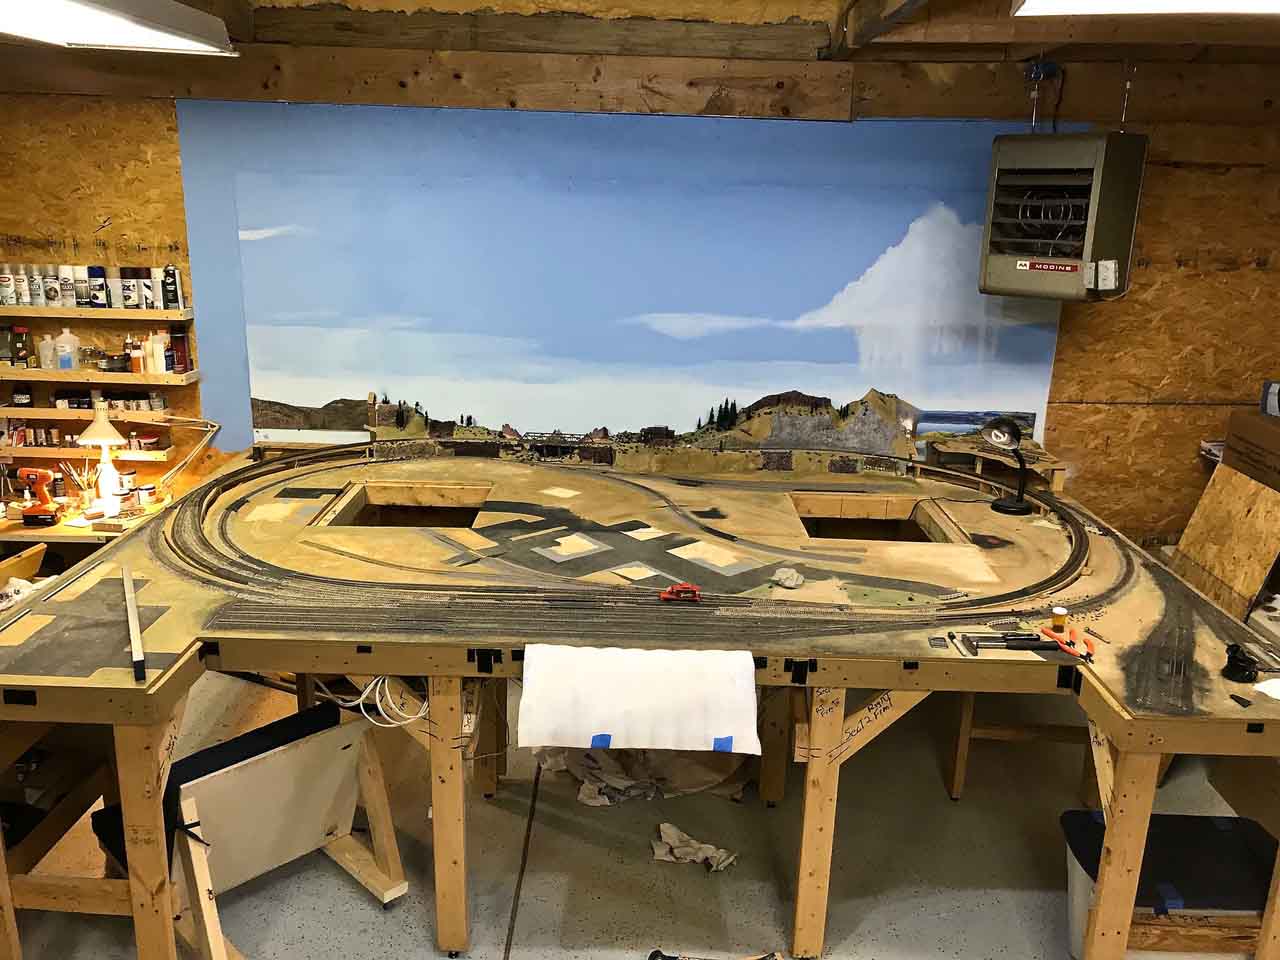 Laying HO scale track with backdrop